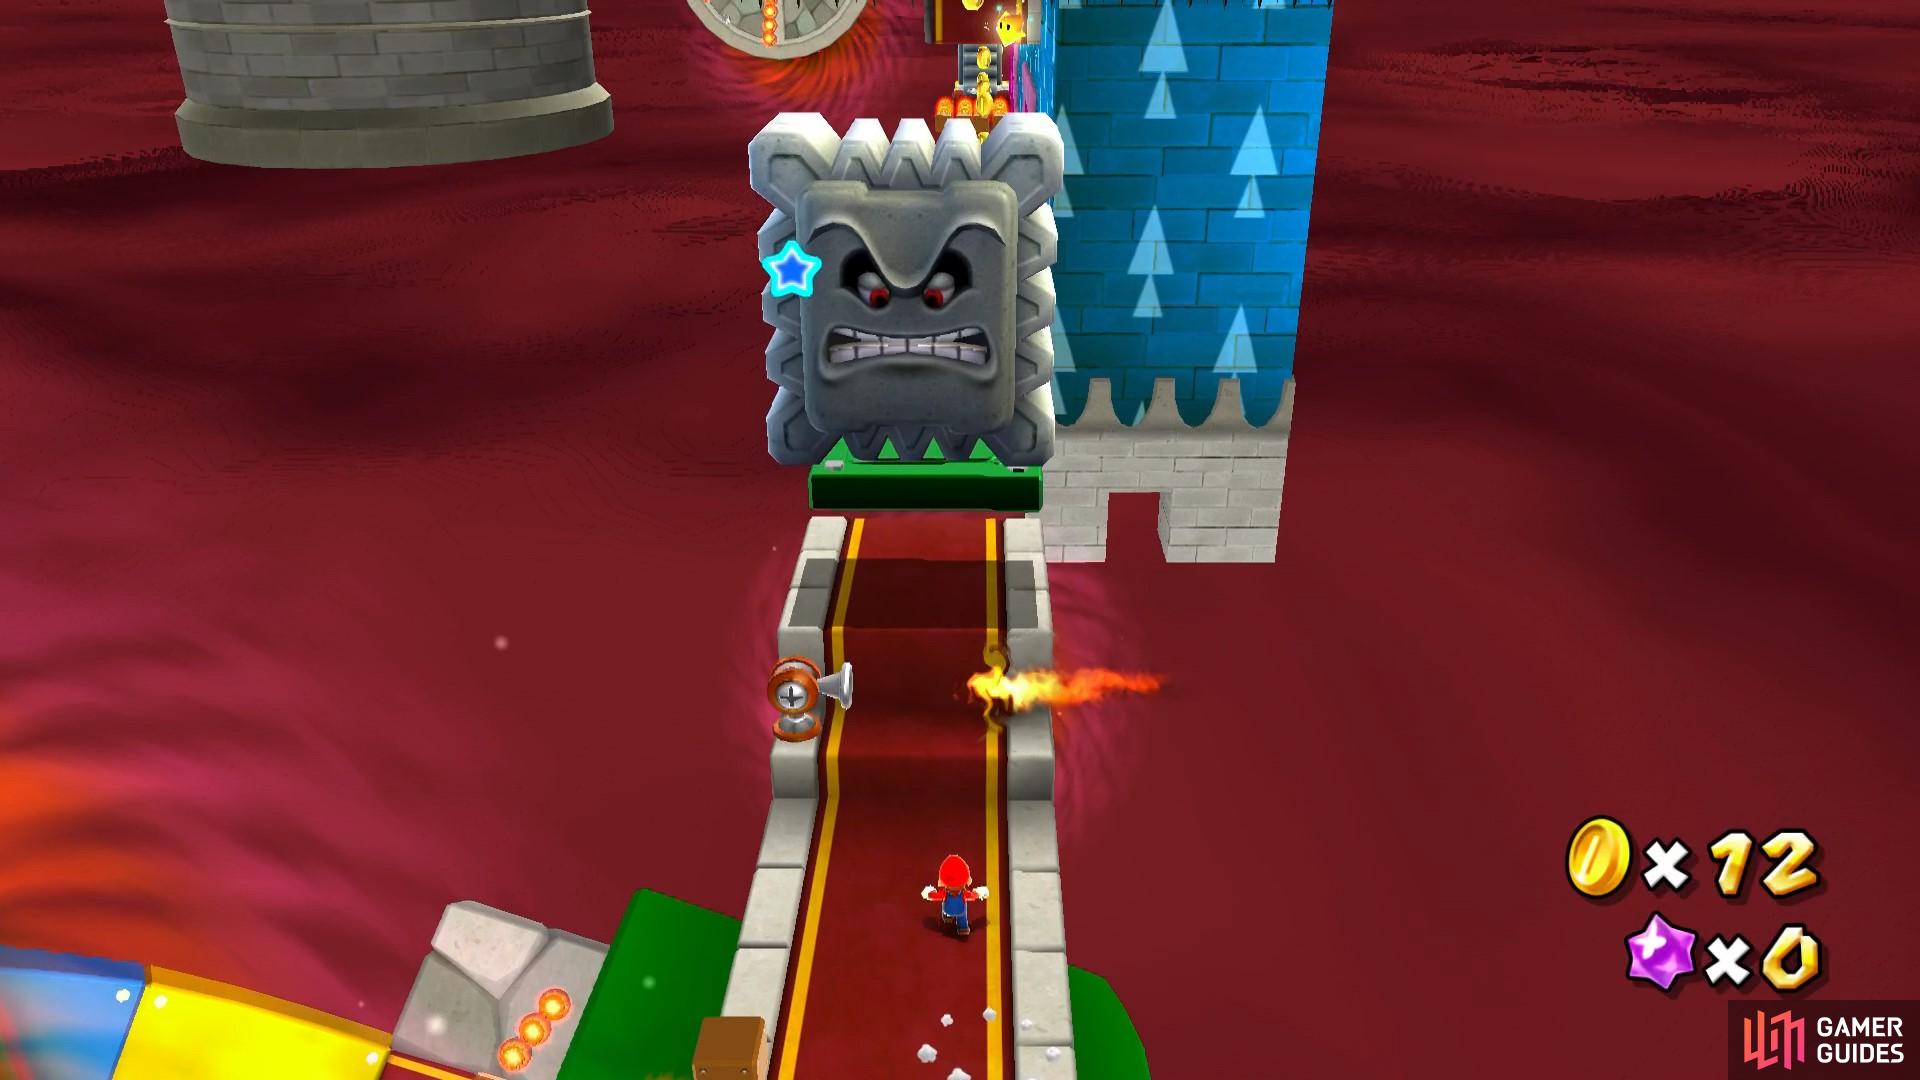 The Thwomp will crush you if you linger too long beneath it.